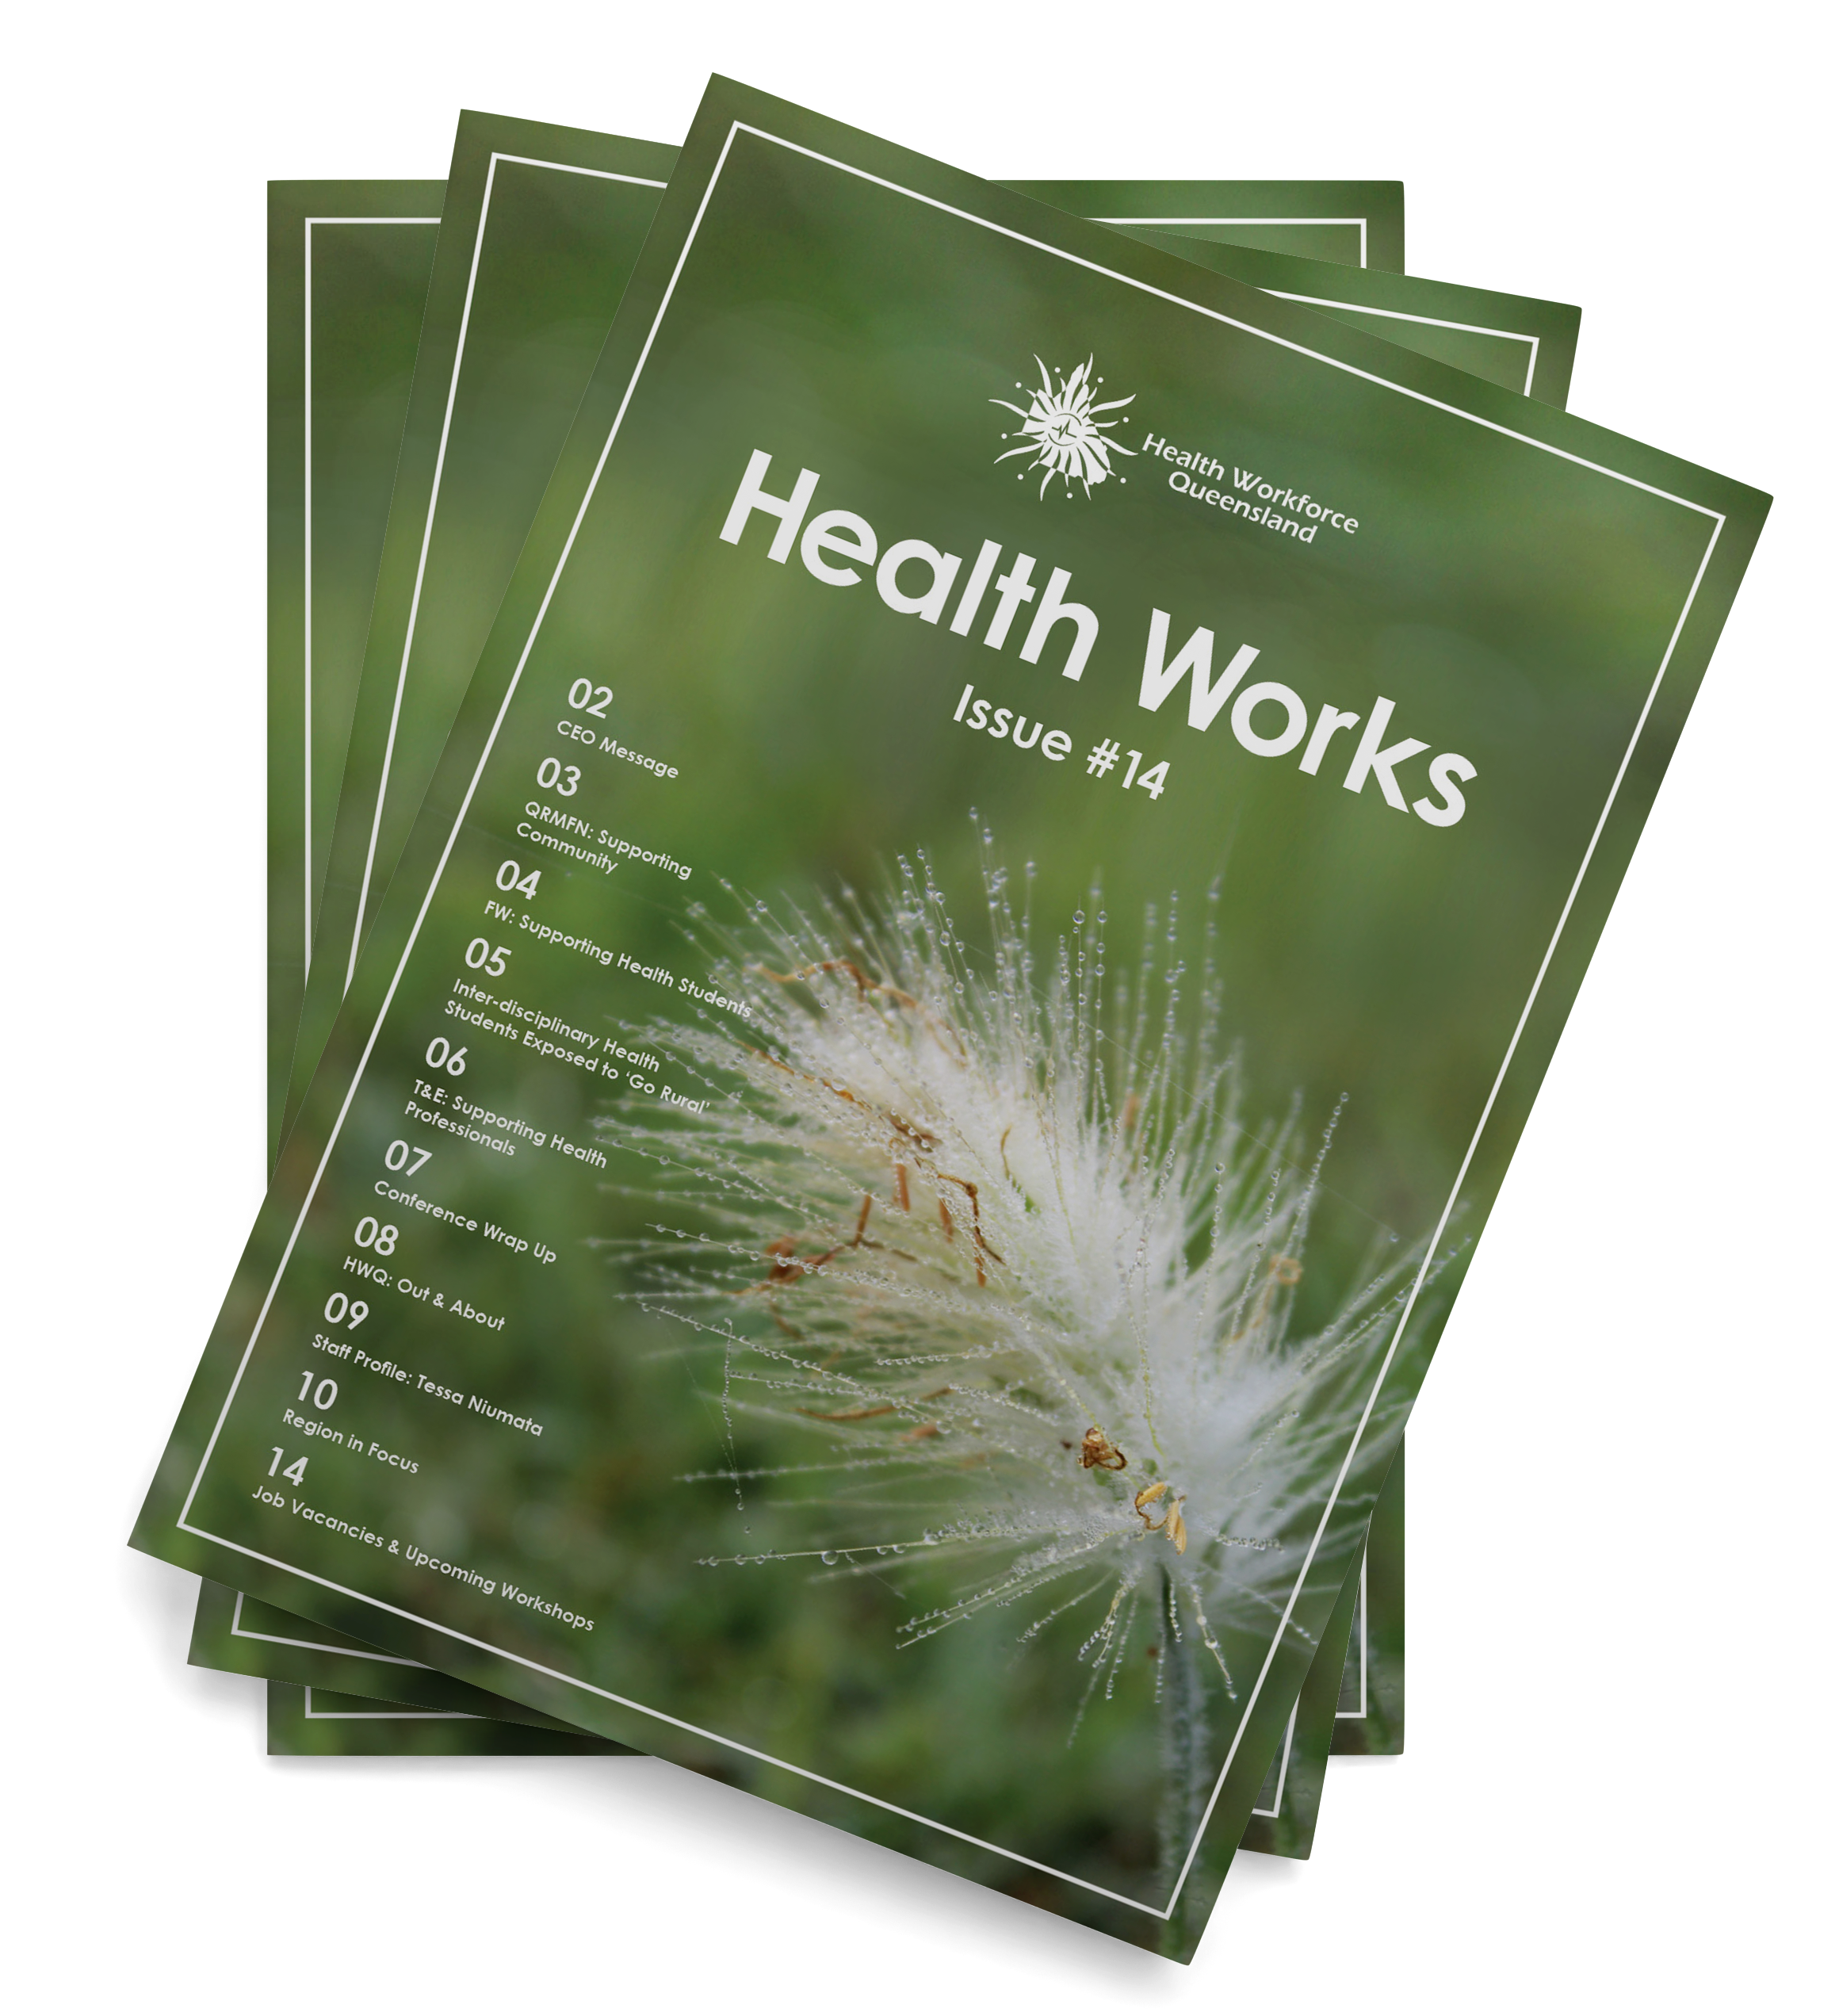 Health Works Issue 14 Mockup